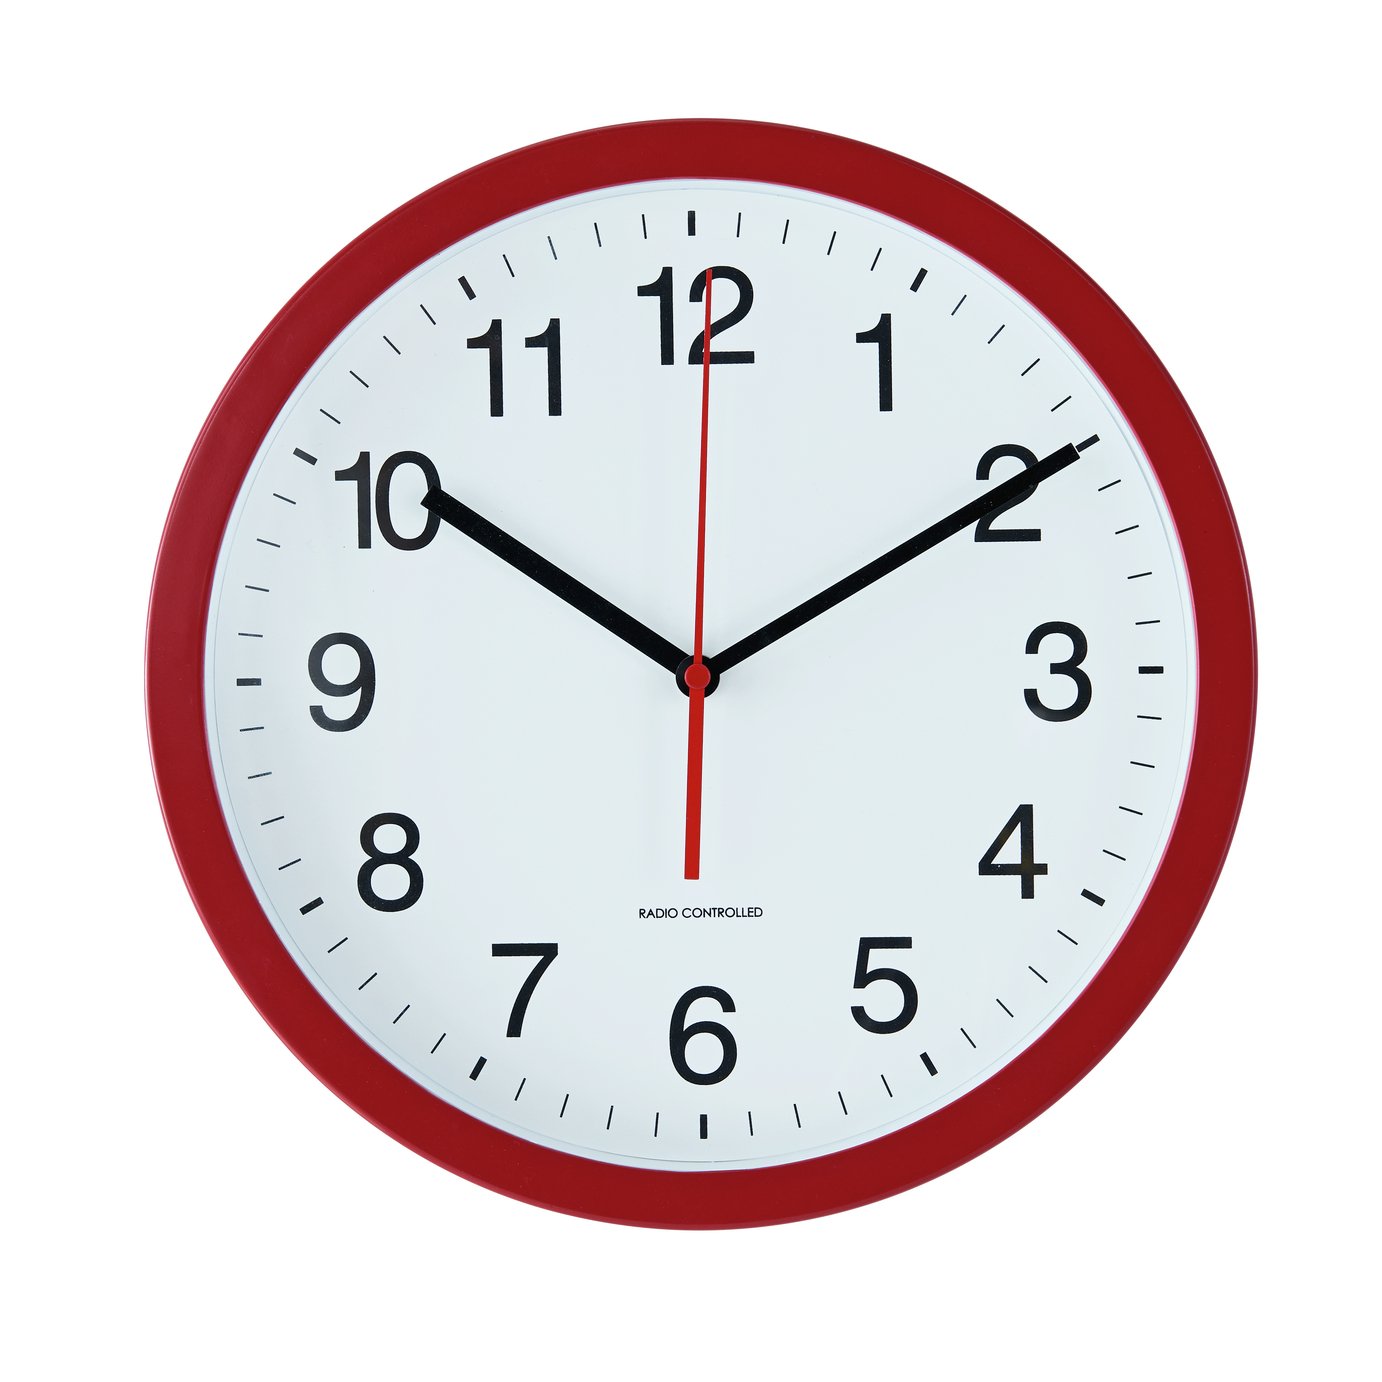 Argos Home Radio Controlled Wall Clock - Red